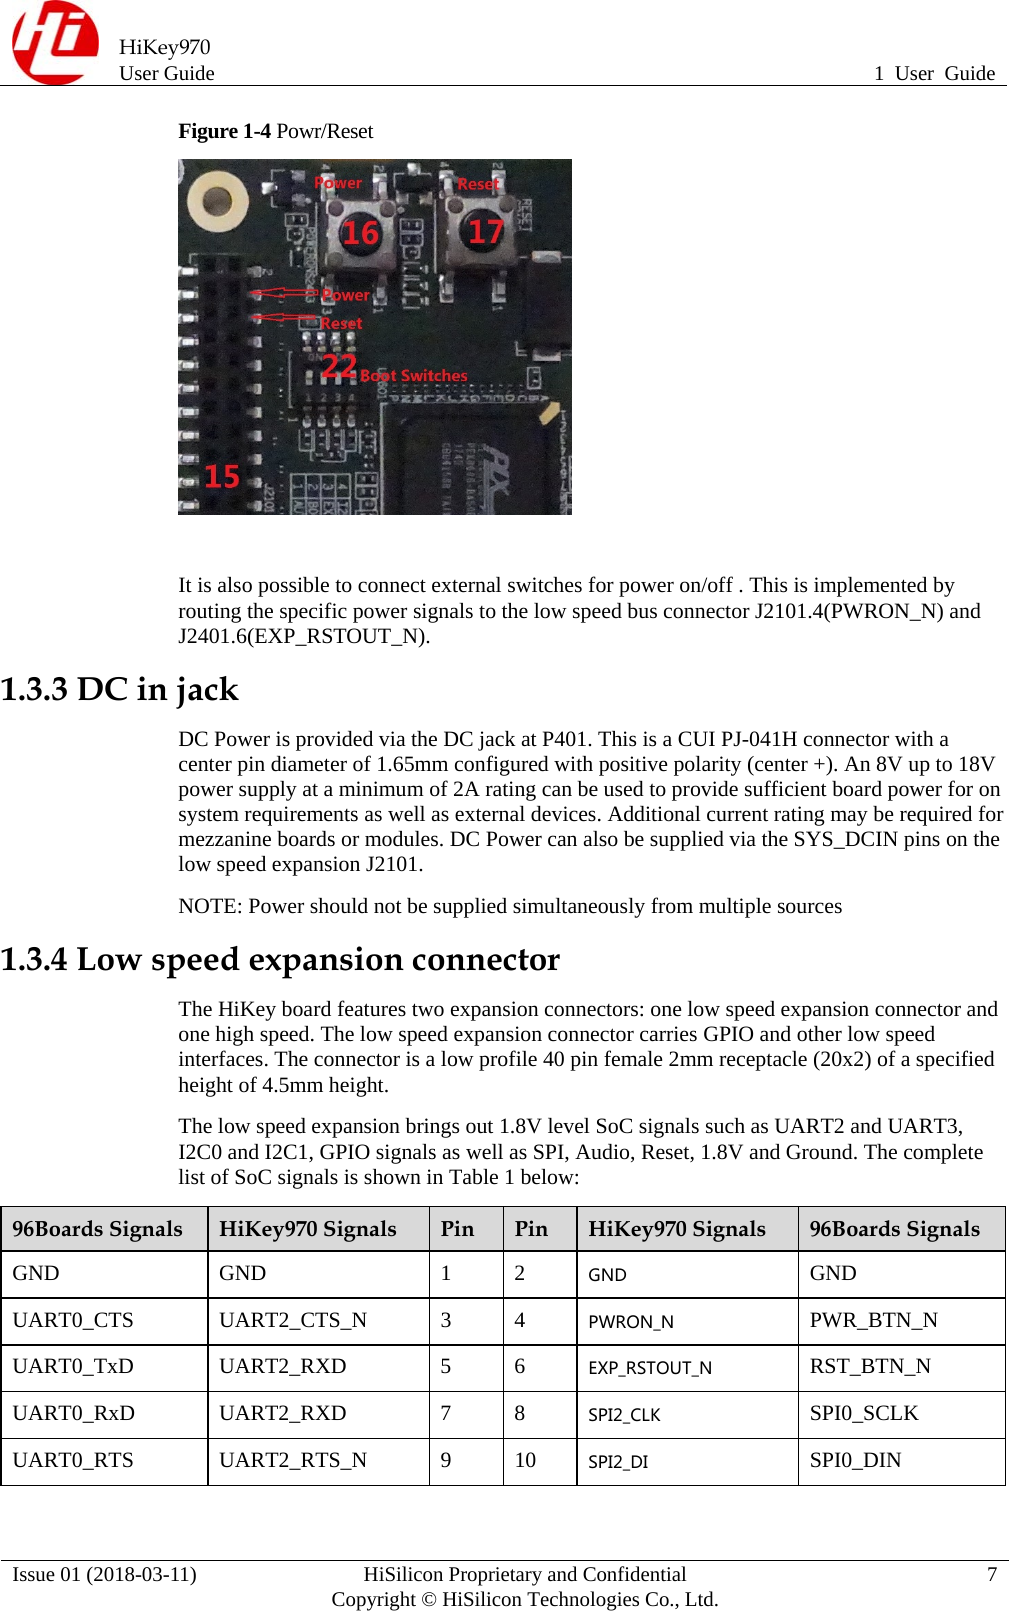  HiKey970 User Guide  1 User Guide Issue 01 (2018-03-11)  HiSilicon Proprietary and Confidential          Copyright © HiSilicon Technologies Co., Ltd.  7 Figure 1-4 Powr/Reset   It is also possible to connect external switches for power on/off . This is implemented by routing the specific power signals to the low speed bus connector J2101.4(PWRON_N) and J2401.6(EXP_RSTOUT_N). 1.3.3 DC in jack DC Power is provided via the DC jack at P401. This is a CUI PJ-041H connector with a center pin diameter of 1.65mm configured with positive polarity (center +). An 8V up to 18V power supply at a minimum of 2A rating can be used to provide sufficient board power for on system requirements as well as external devices. Additional current rating may be required for mezzanine boards or modules. DC Power can also be supplied via the SYS_DCIN pins on the low speed expansion J2101.     NOTE: Power should not be supplied simultaneously from multiple sources 1.3.4 Low speed expansion connector The HiKey board features two expansion connectors: one low speed expansion connector and one high speed. The low speed expansion connector carries GPIO and other low speed interfaces. The connector is a low profile 40 pin female 2mm receptacle (20x2) of a specified height of 4.5mm height.   The low speed expansion brings out 1.8V level SoC signals such as UART2 and UART3, I2C0 and I2C1, GPIO signals as well as SPI, Audio, Reset, 1.8V and Ground. The complete list of SoC signals is shown in Table 1 below: 96Boards Signals  HiKey970 Signals  Pin  Pin  HiKey970 Signals  96Boards Signals GND GND  1 2 GND GND UART0_CTS UART2_CTS_N 3 4 PWRON_N PWR_BTN_N UART0_TxD UART2_RXD  5 6 EXP_RSTOUT_N RST_BTN_N UART0_RxD UART2_RXD  7 8 SPI2_CLK SPI0_SCLK UART0_RTS UART2_RTS_N 9 10 SPI2_DI SPI0_DIN 